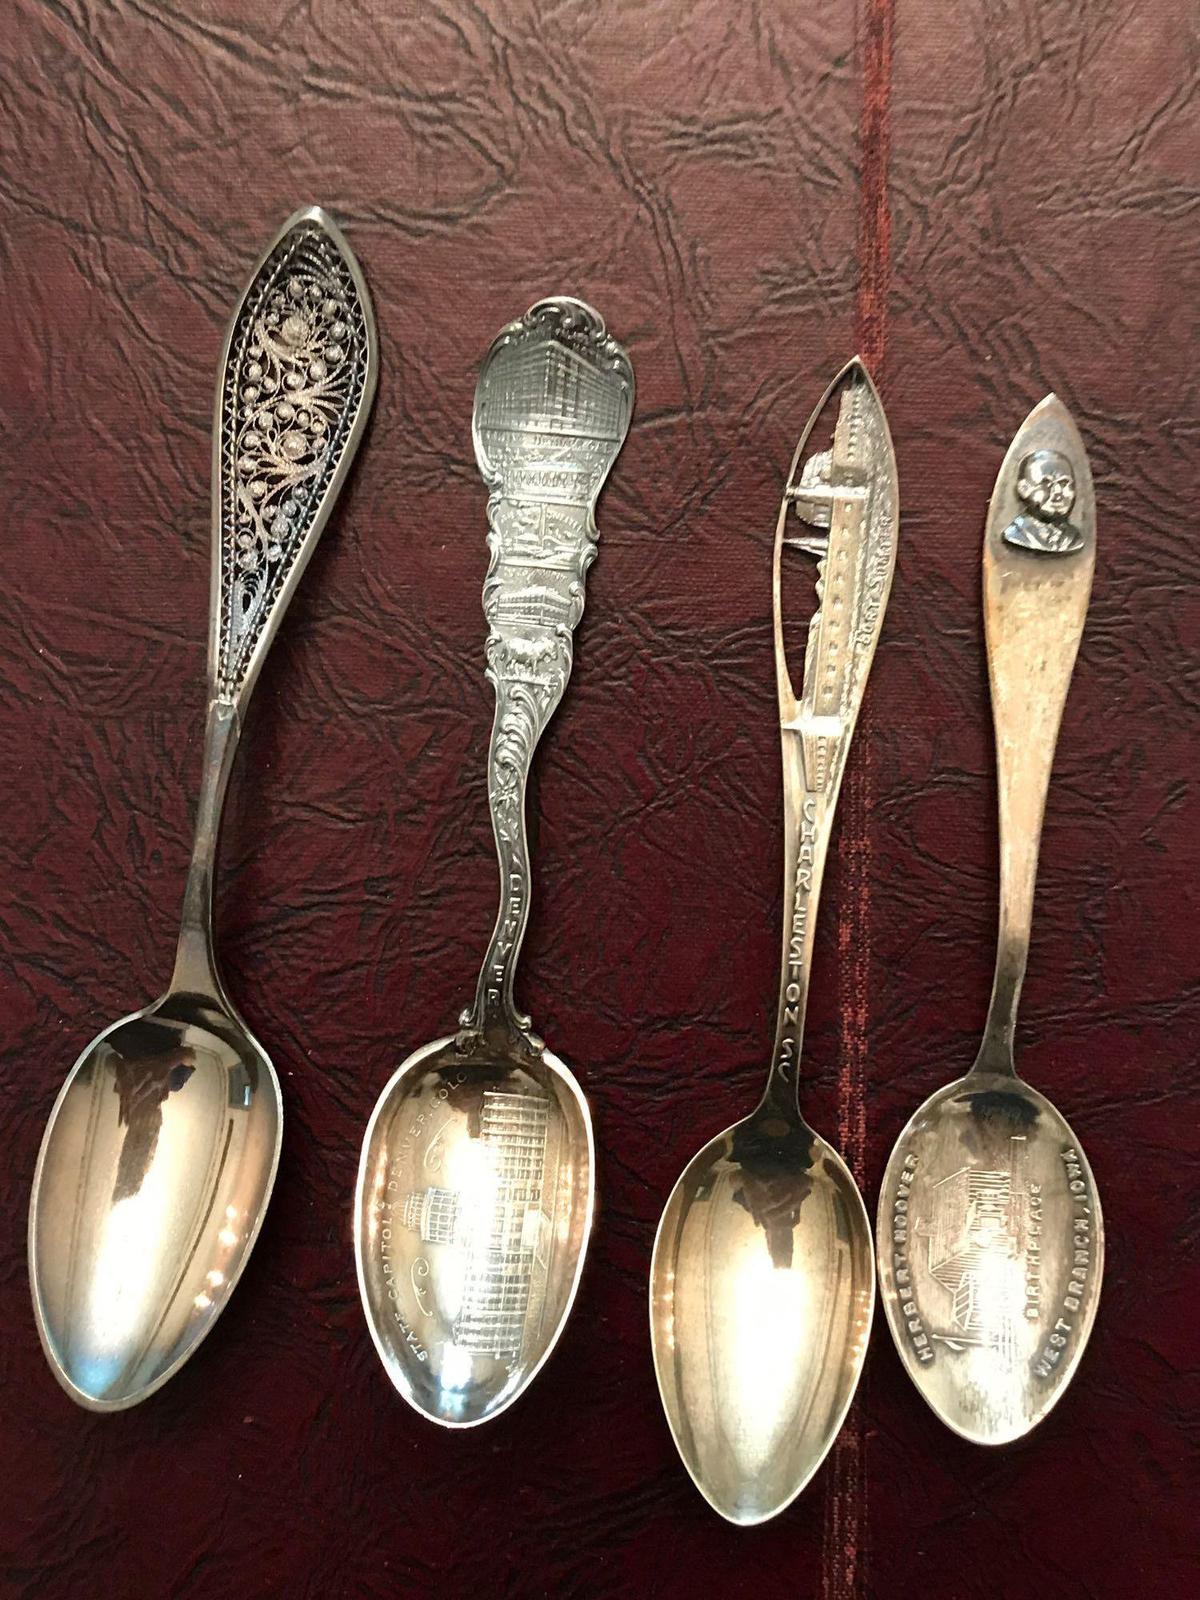 Lot of 4 vintage spoons